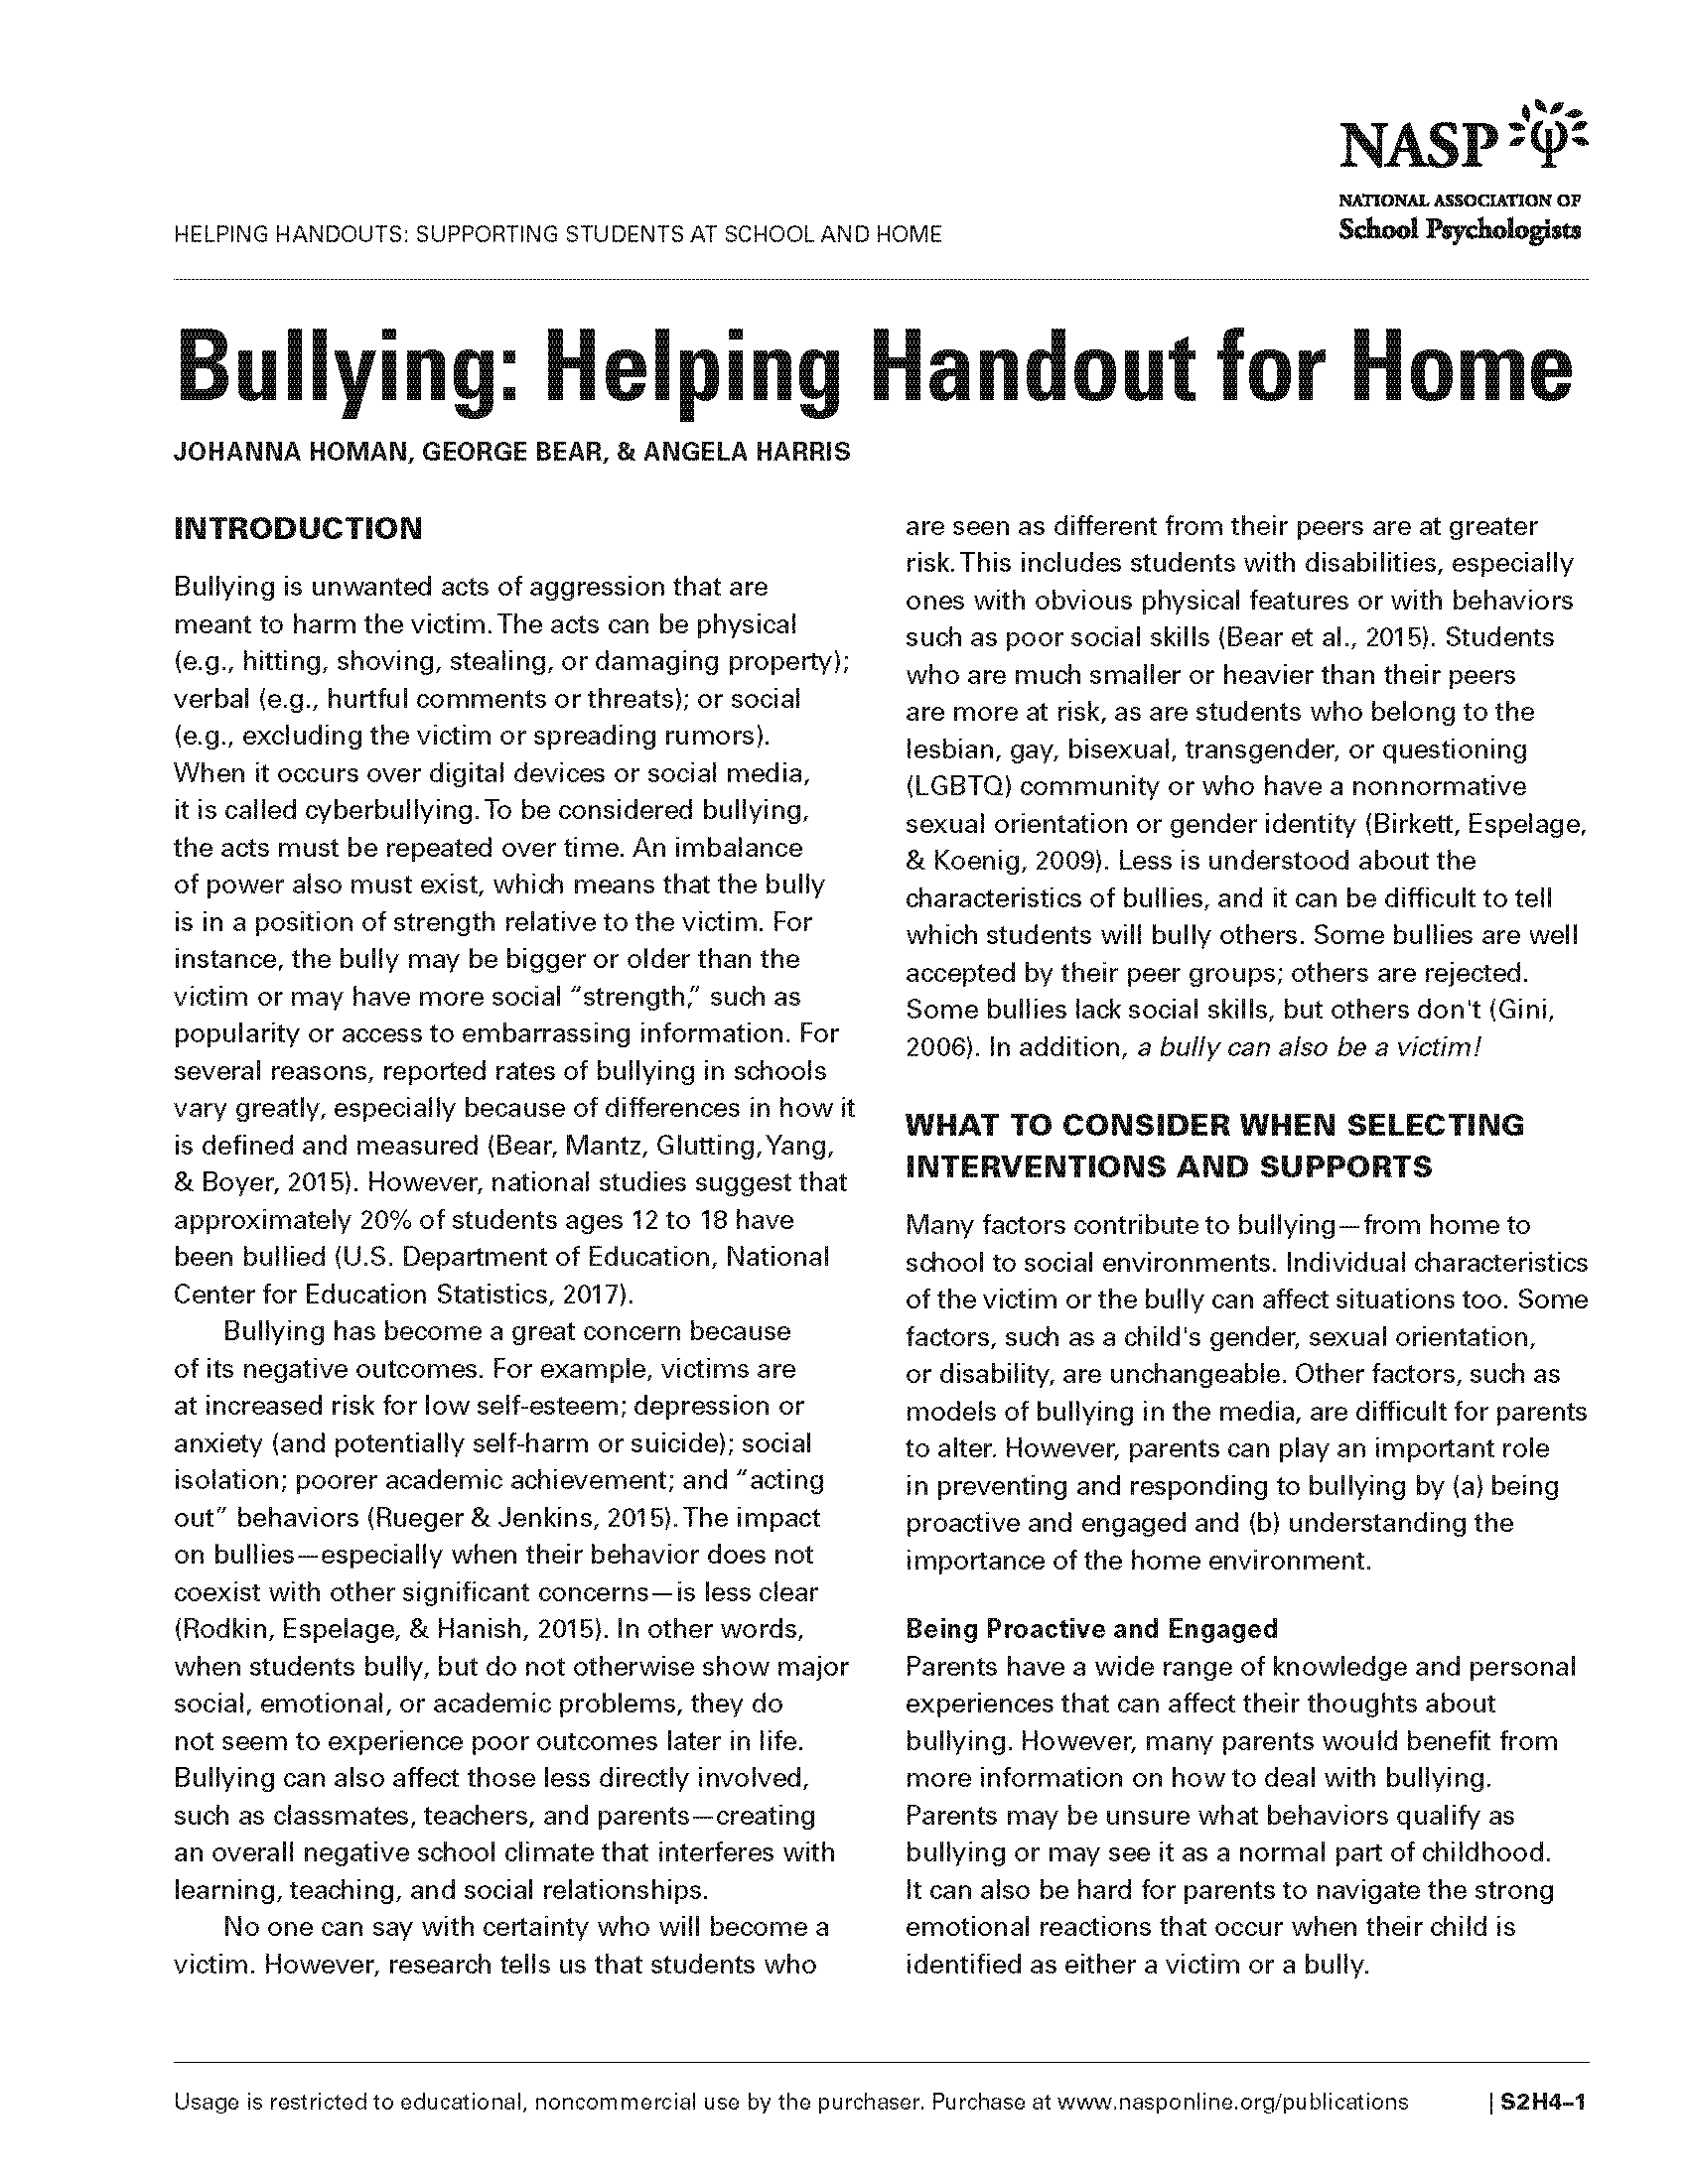 Bullying: Helping Handout for Home